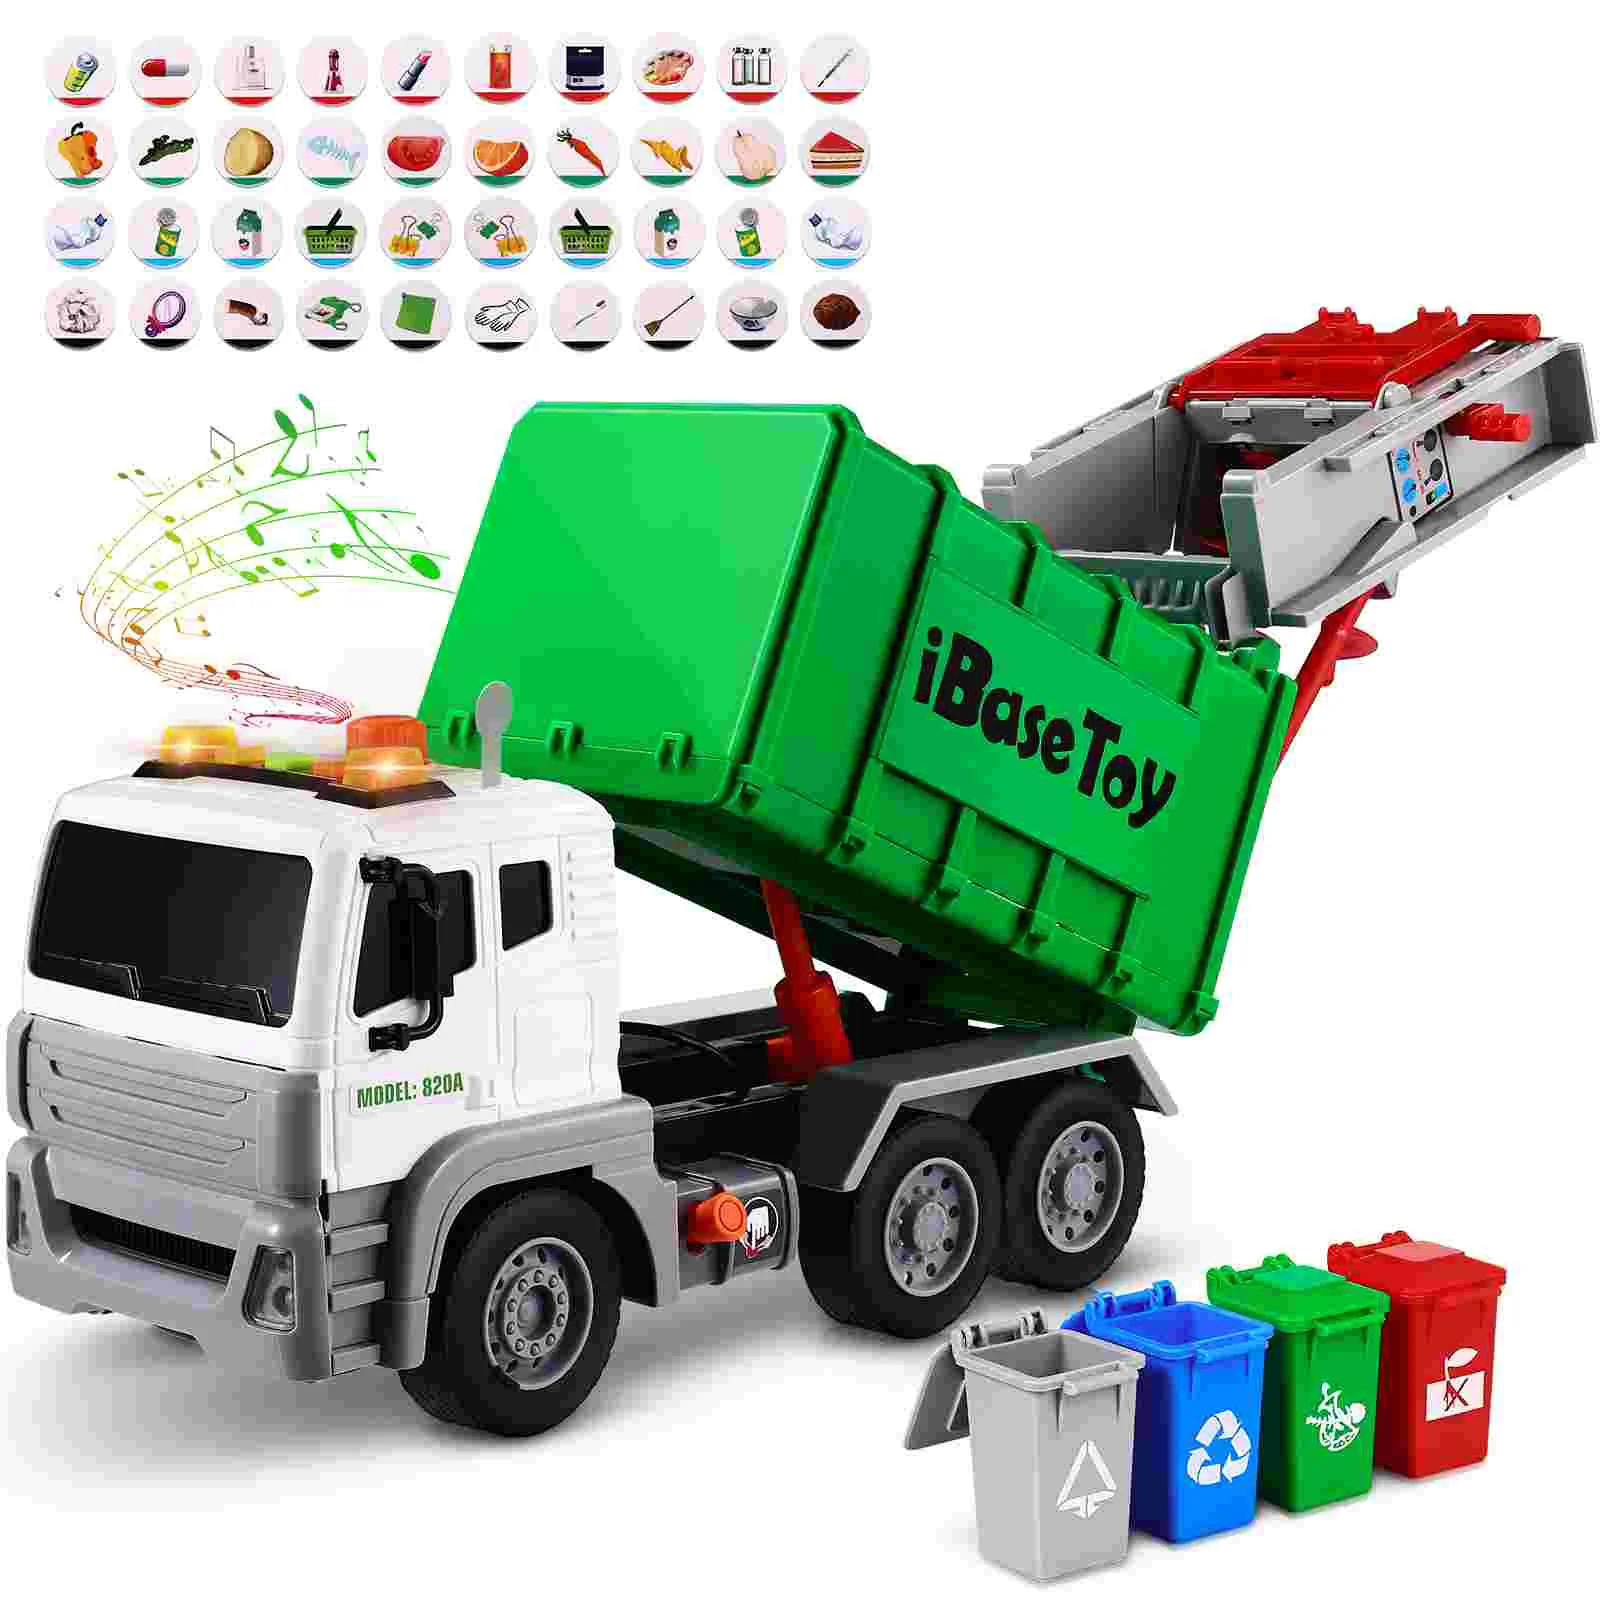 

iBaseToy Garbage Truck Toys Rubbish Collector Car Model Kids Toddlers Trash Classification Learning Game Vehicle Set